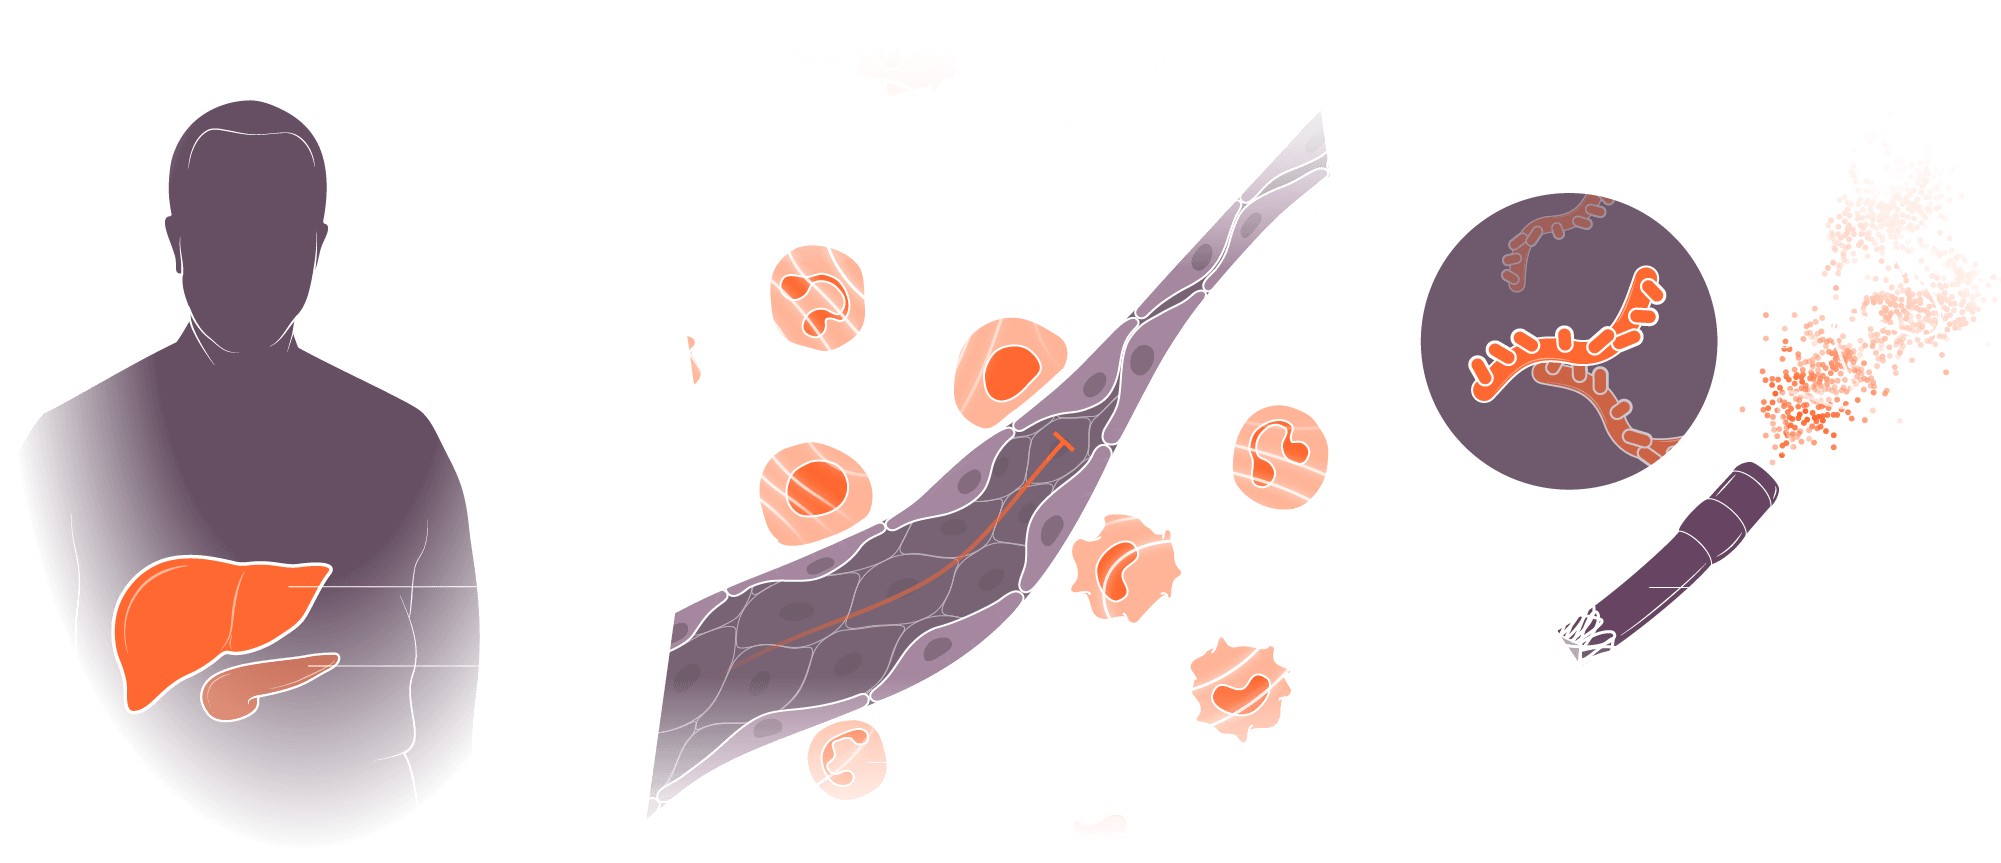 Illustration of the two organs, two problems, two solutions approach that TriSalus is working on. Two organs: the liver and pancreas in an elderly, male patient. Addressing two problems: immunosuppression and tumor pressure which causes blood vessel collapse. Combining two solutions: immunotherapy via pressure enabled drug delivery.